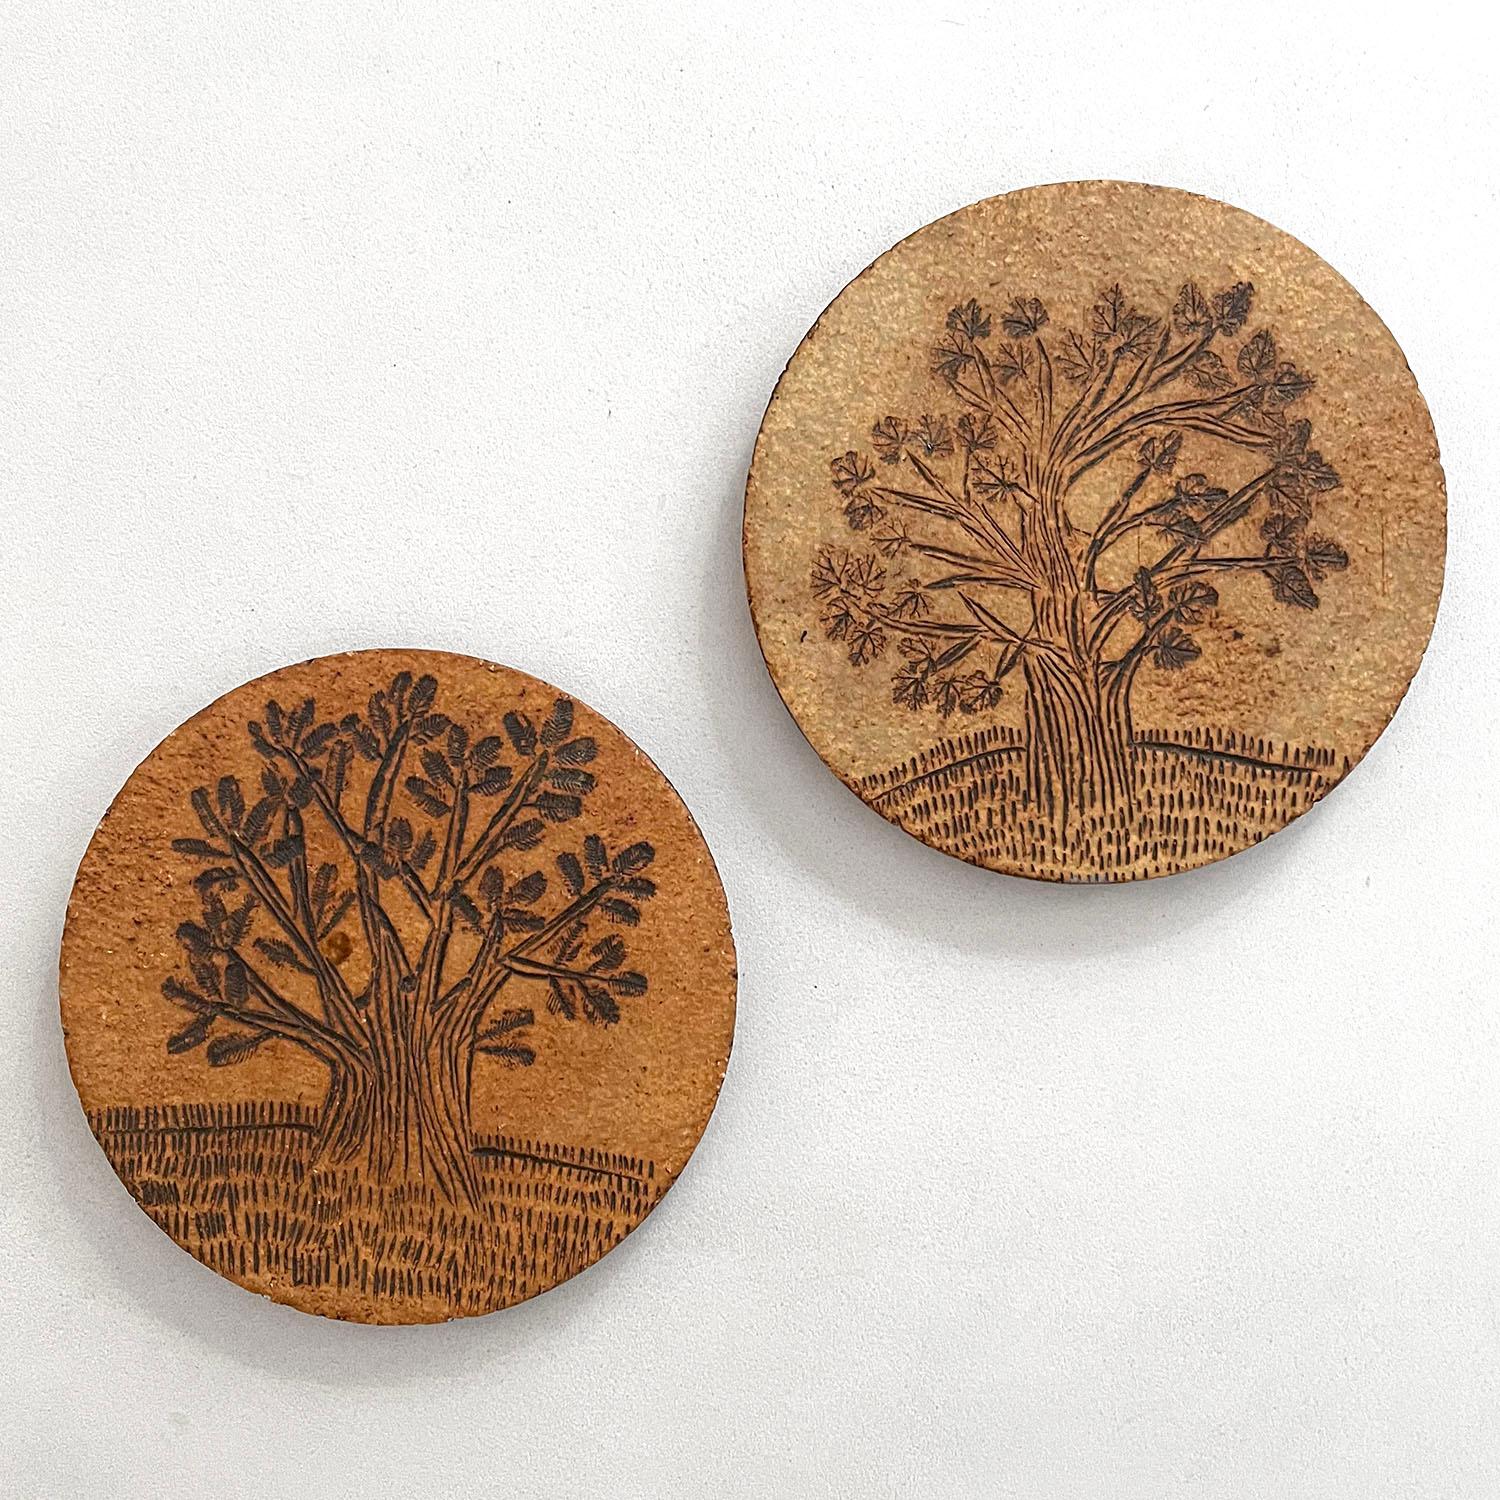 Roger Capron tree of life stoneware paperweights
France, circa 1950’s
Beautifully preserved 
Handmade, intricately etched trees
Organic matte finish
Marked identification
Can be used as a paper weight or coaster
Patina from age and use
Priced and